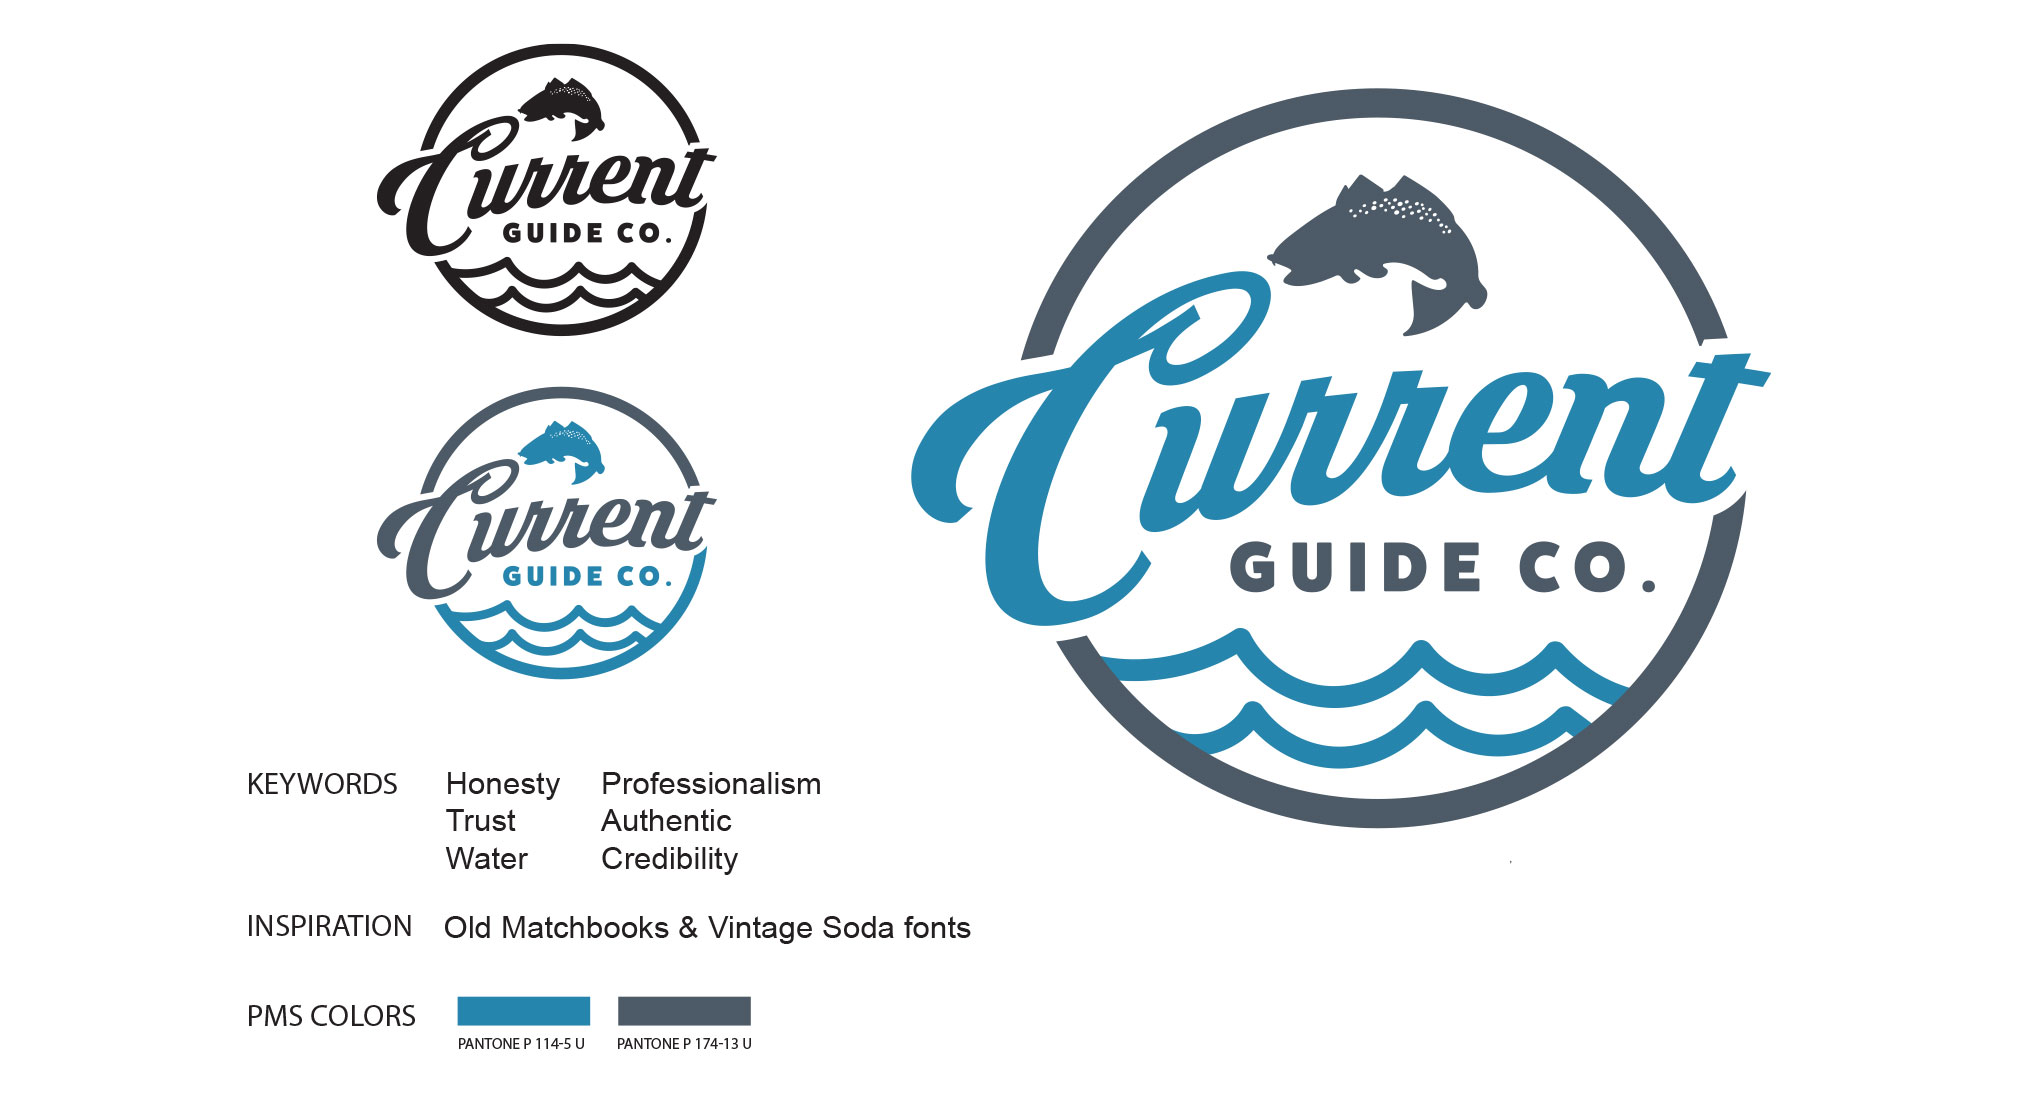 Current Guide Company